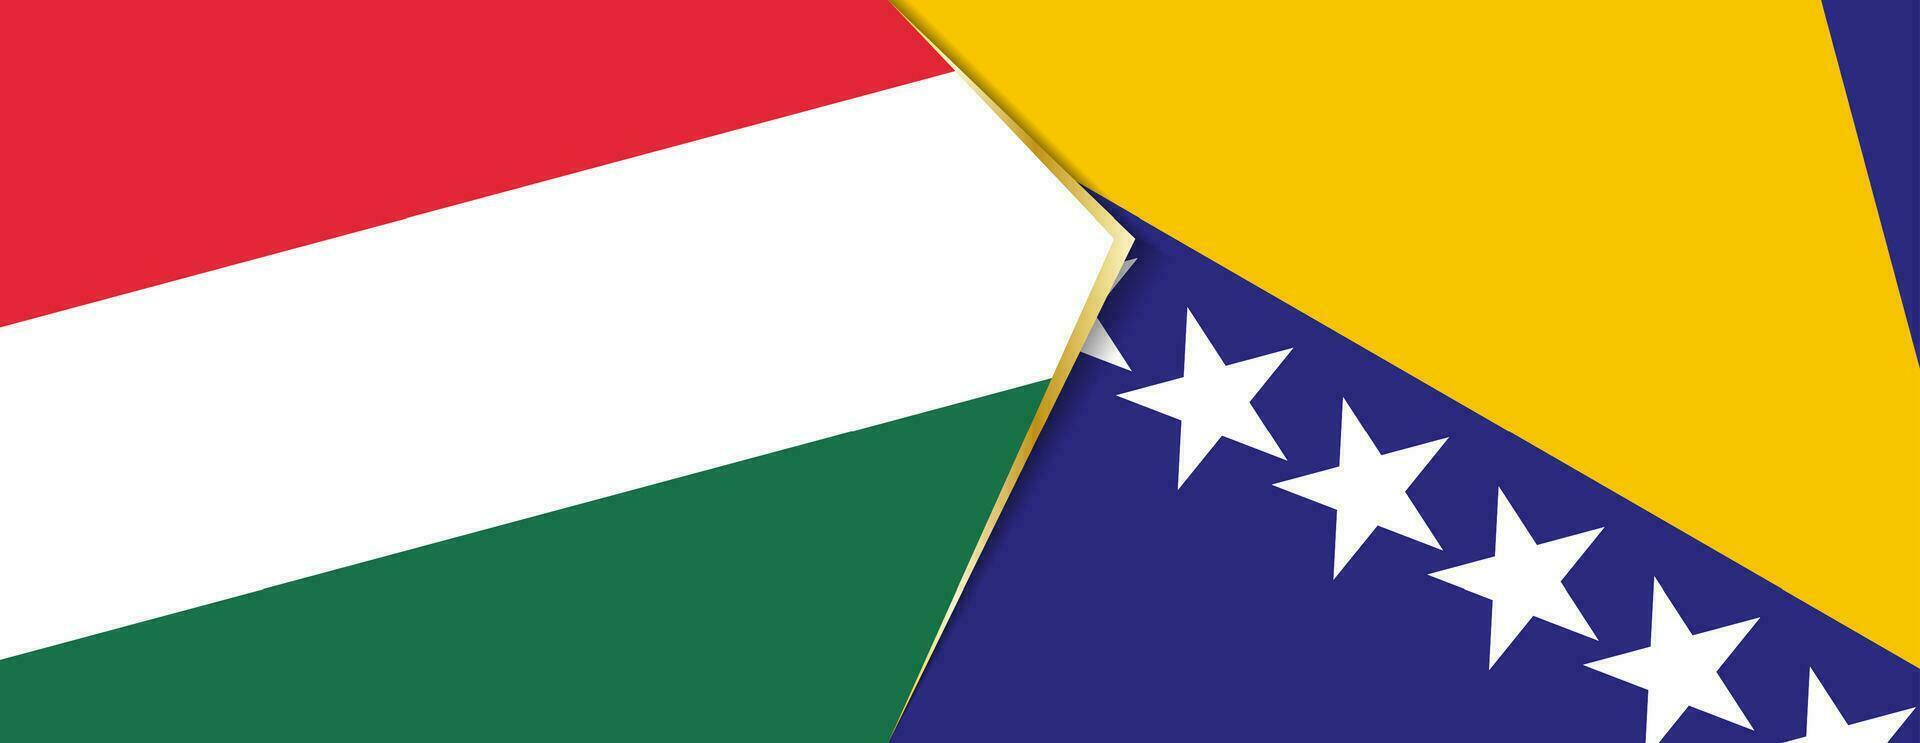 Hungary and Bosnia and Herzegovina flags, two vector flags.